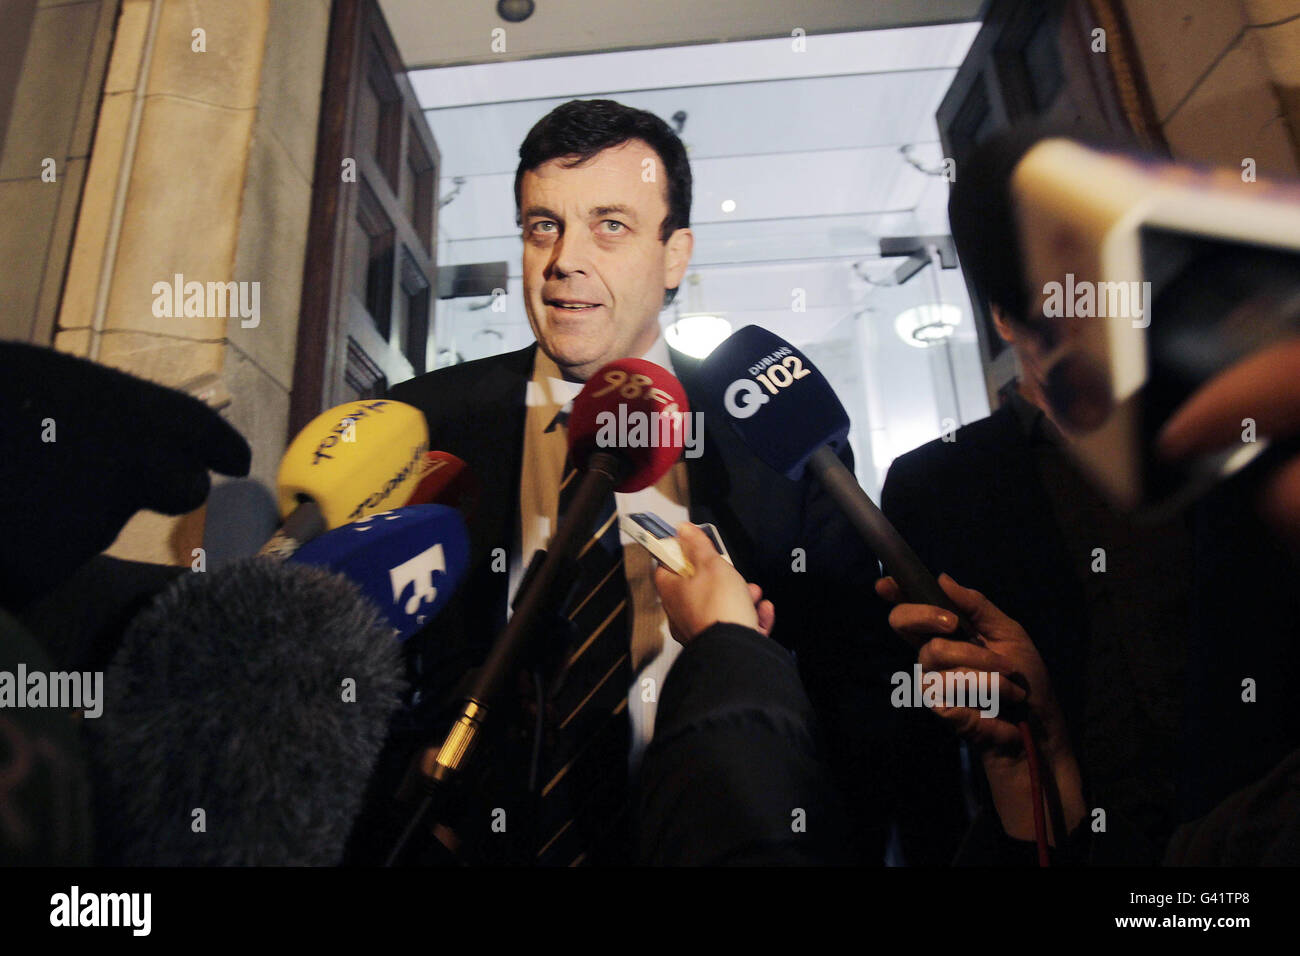 Finance Minister Brian Lenihan speaking to the media outside the Finance department on Merrion row in Dublin. Ireland's minority Government tonight secured support from the Opposition parties to pass the Finance Bill and dissolve parliament next week. Stock Photo